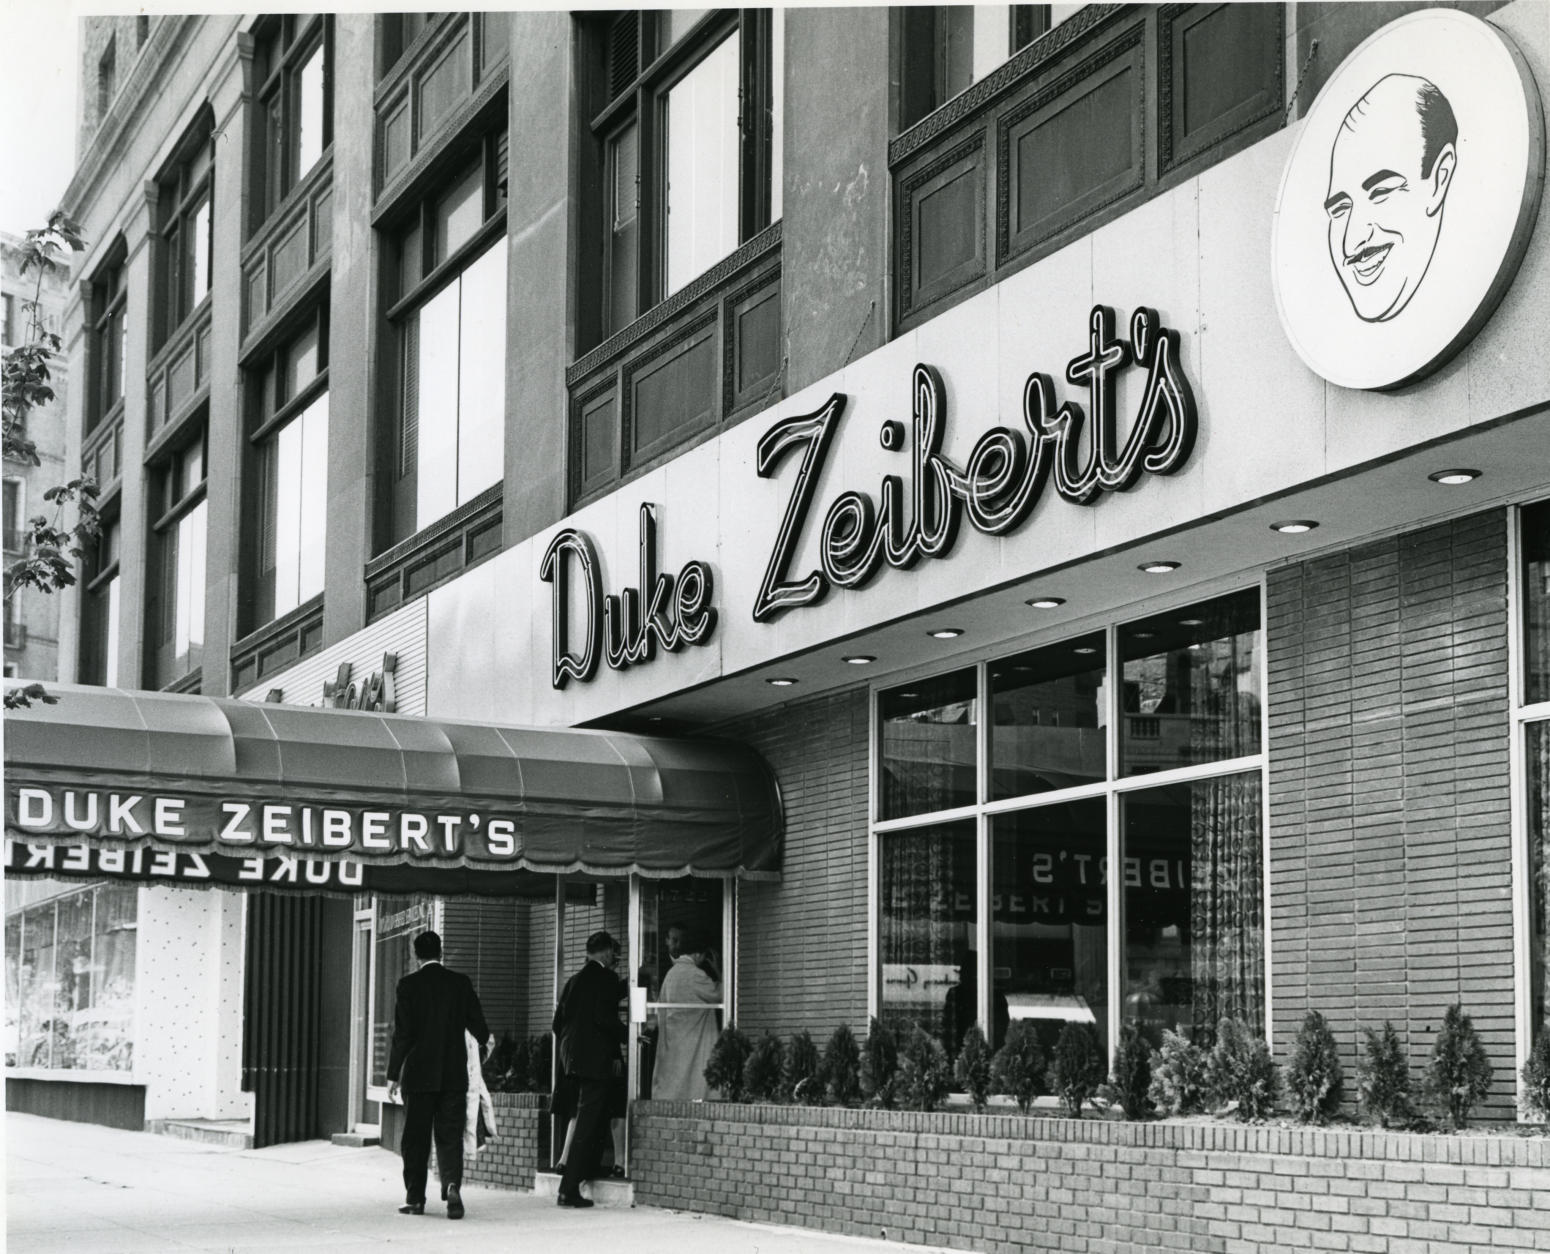 Duke Zeibert went into business for himself in 1950 in the old LaSalle Building, located in the 1000 block of Connecticut Avenue Northwest. The Washington Square building stands there now. (Courtesy Historical Society of Washington, D.C.)